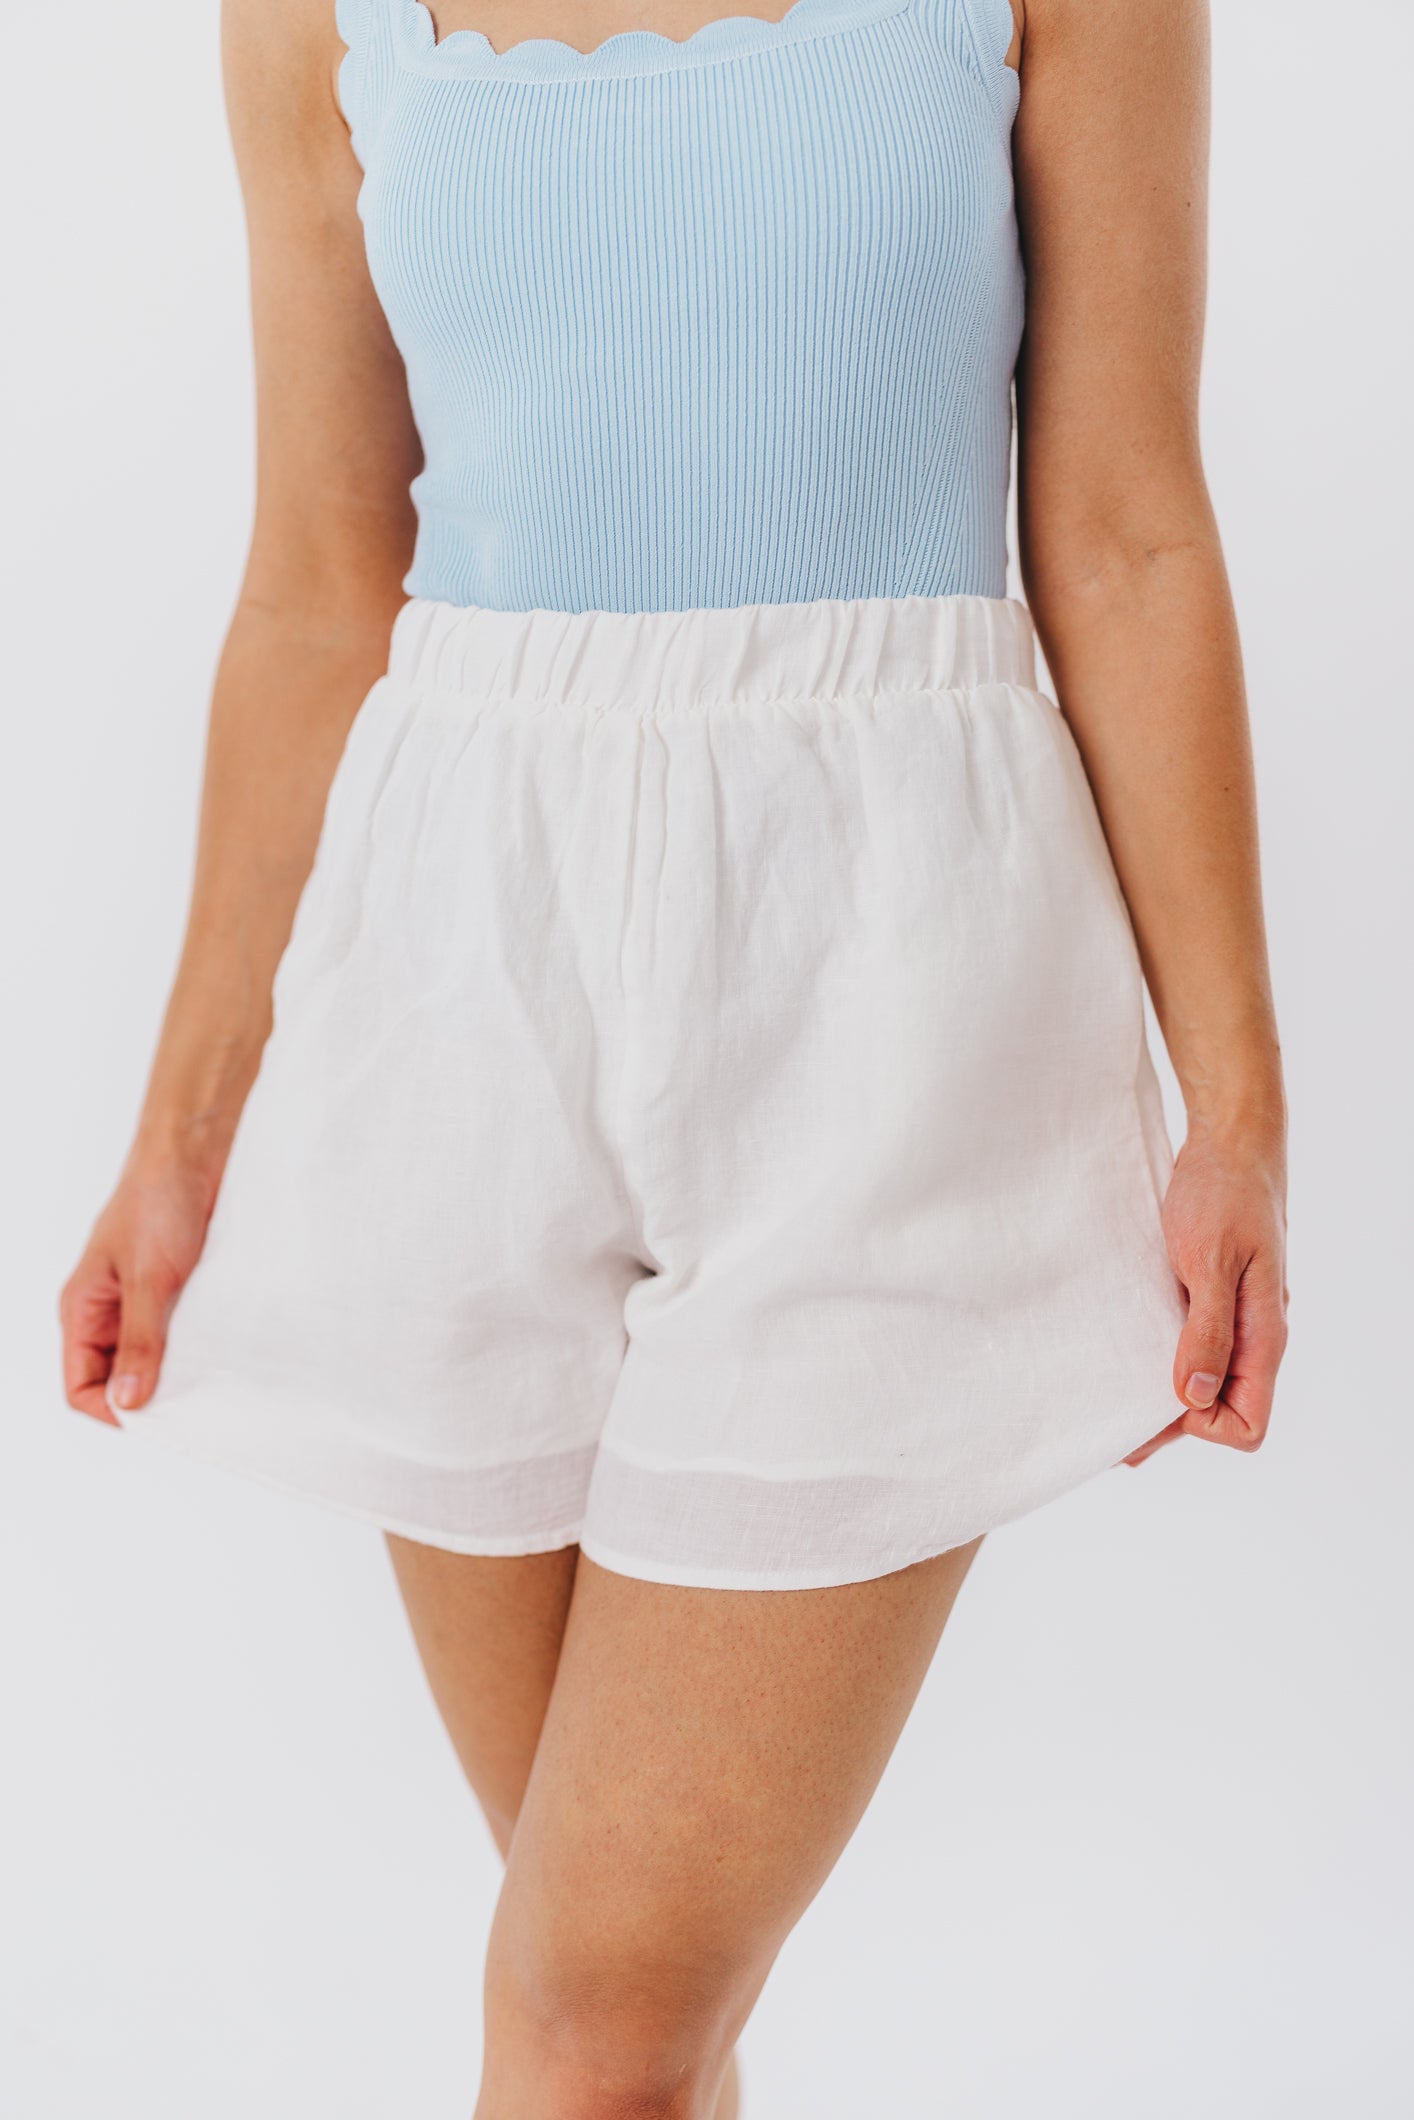 Tahlia Shorts in Off-White